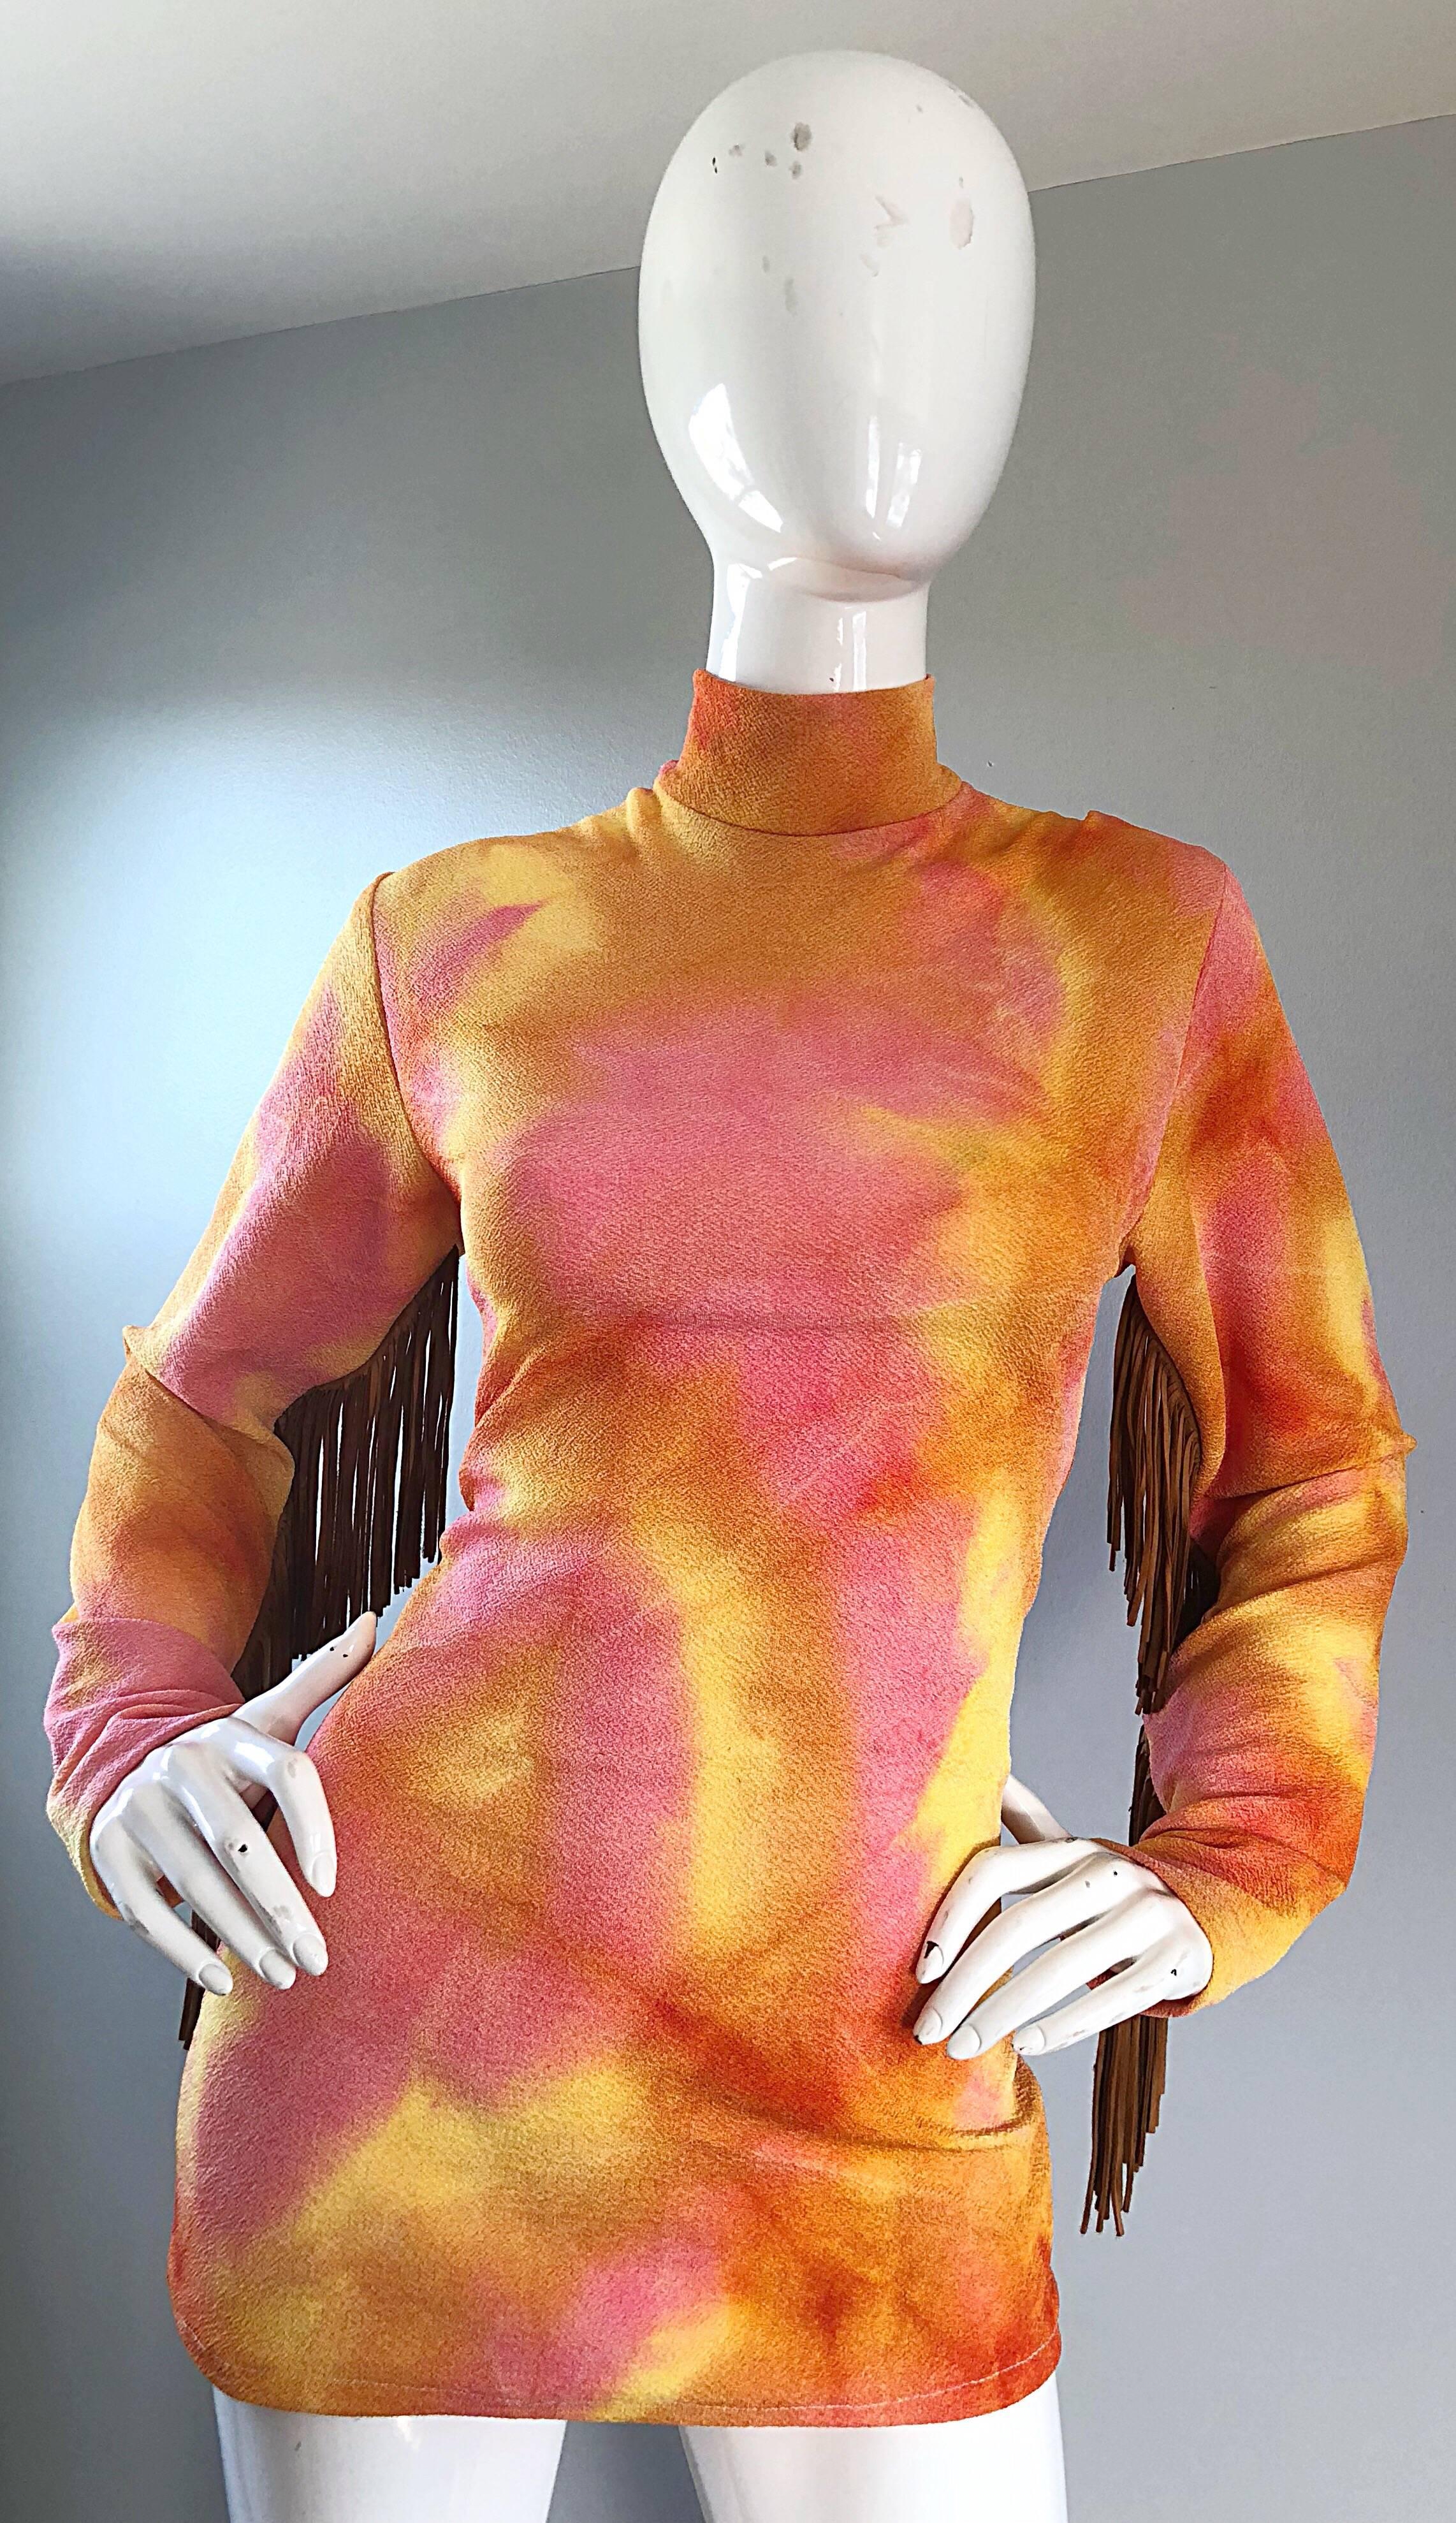 Amazing vintage 70s pink and orange tie dye tunic top! Features a flattering stretch to fit silhouette, with a high mock neck. Brown / tan leather suede fringe on the back of each sleeve. Great belted or alone, and can easily be dressed up or down.